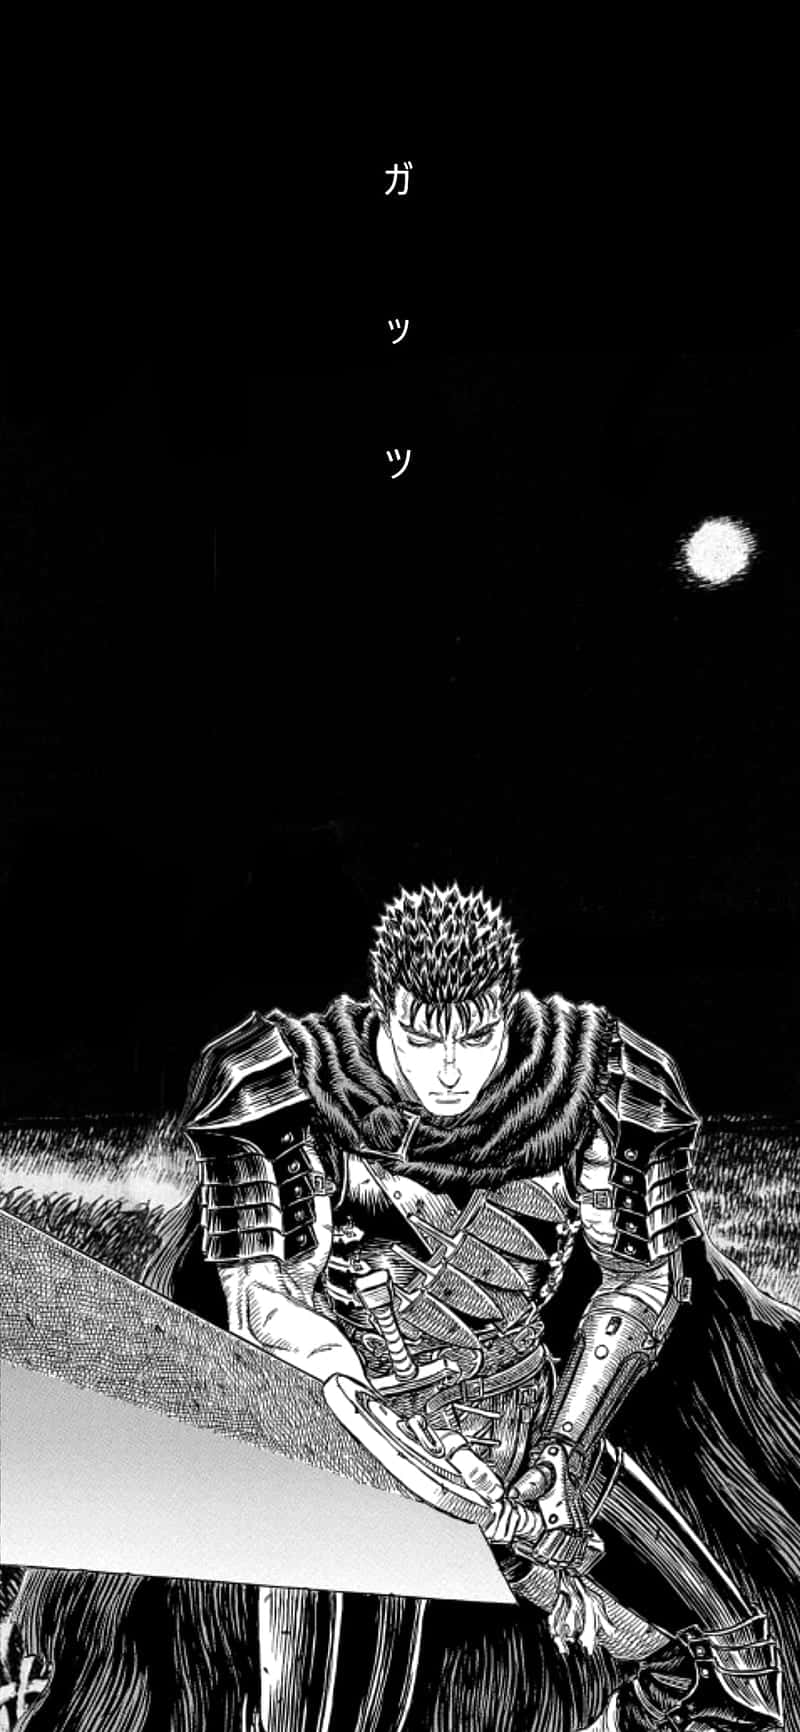 Get ready for a wild ride with Guts and his Band of the Hawk in Berserk.